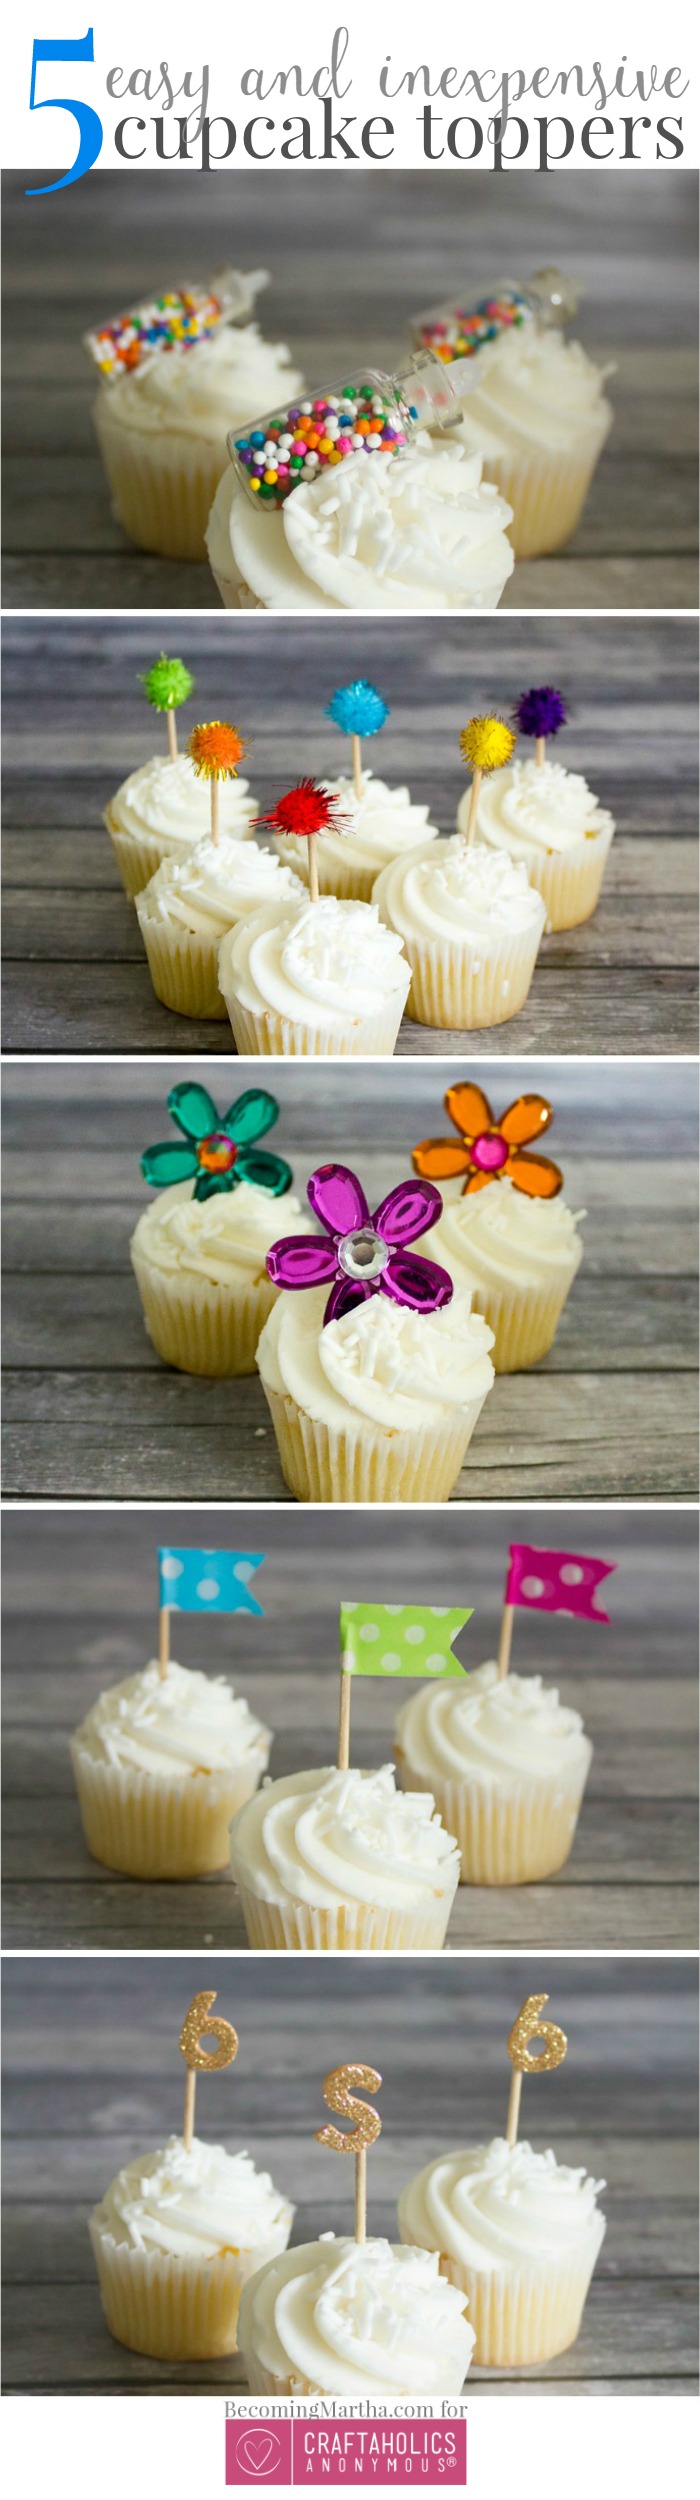 5 Easy and Inexpensive cupcake topper ideas from Craftaholics Anonymous